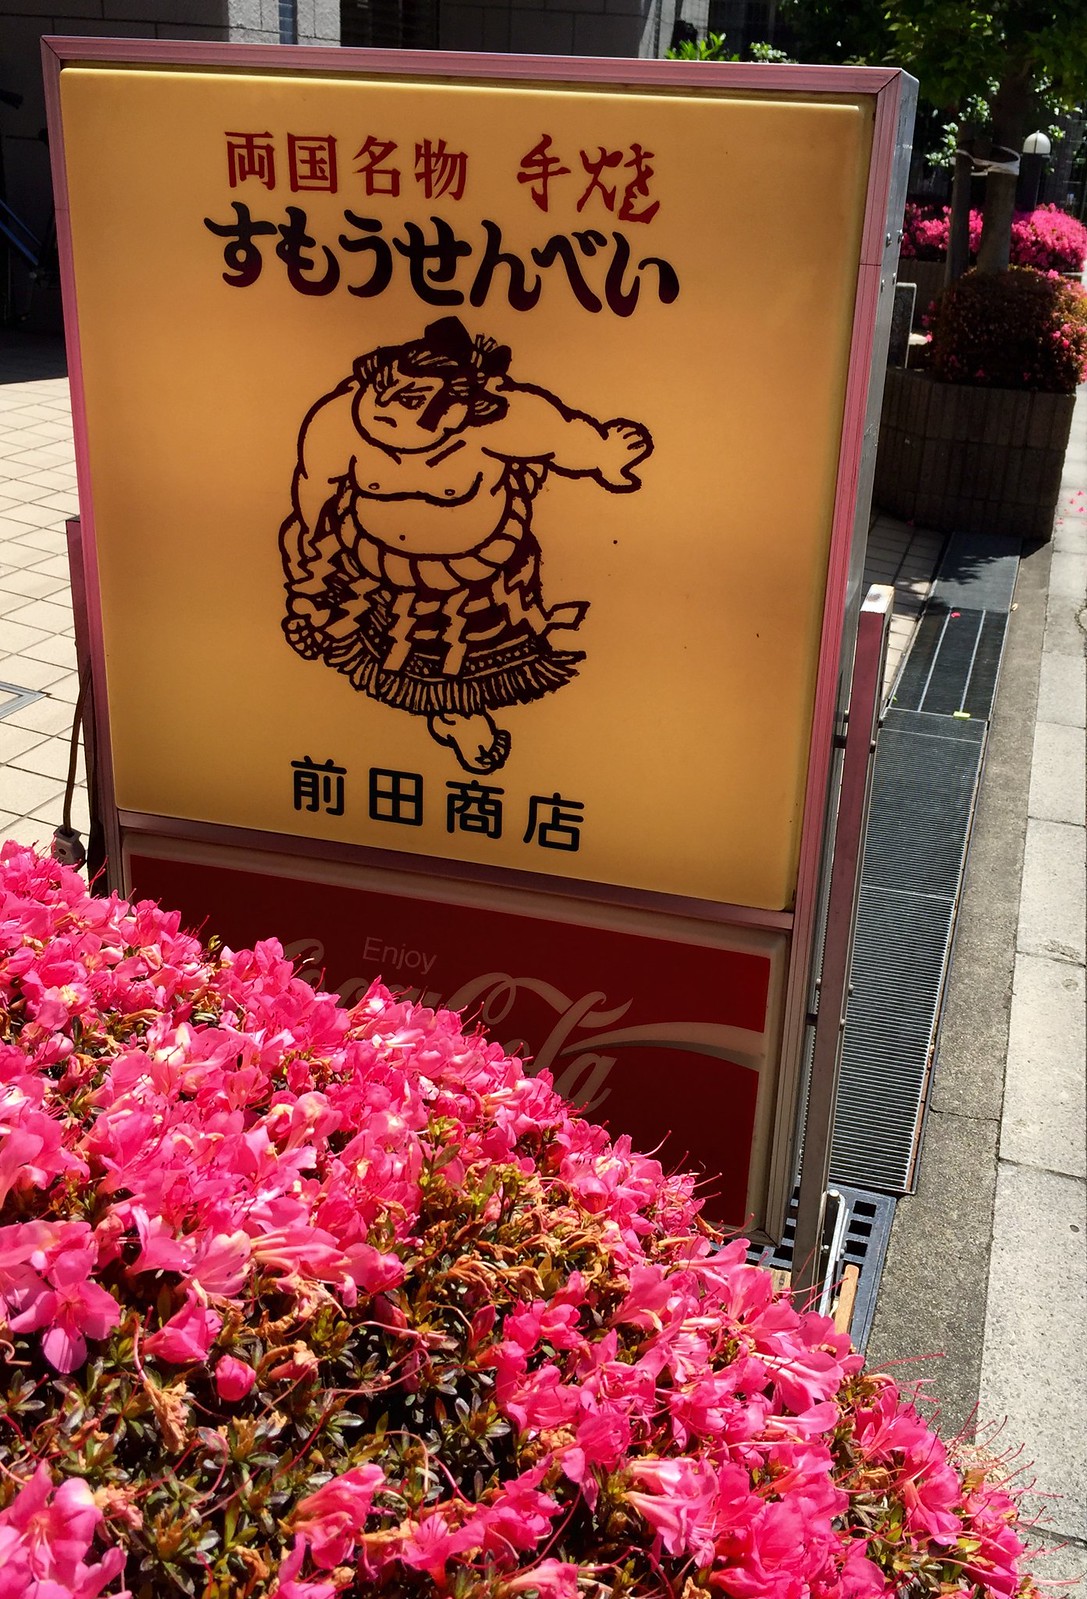 Lion-do, shop for Sumo size clothing at Ryogoku in Tokyo